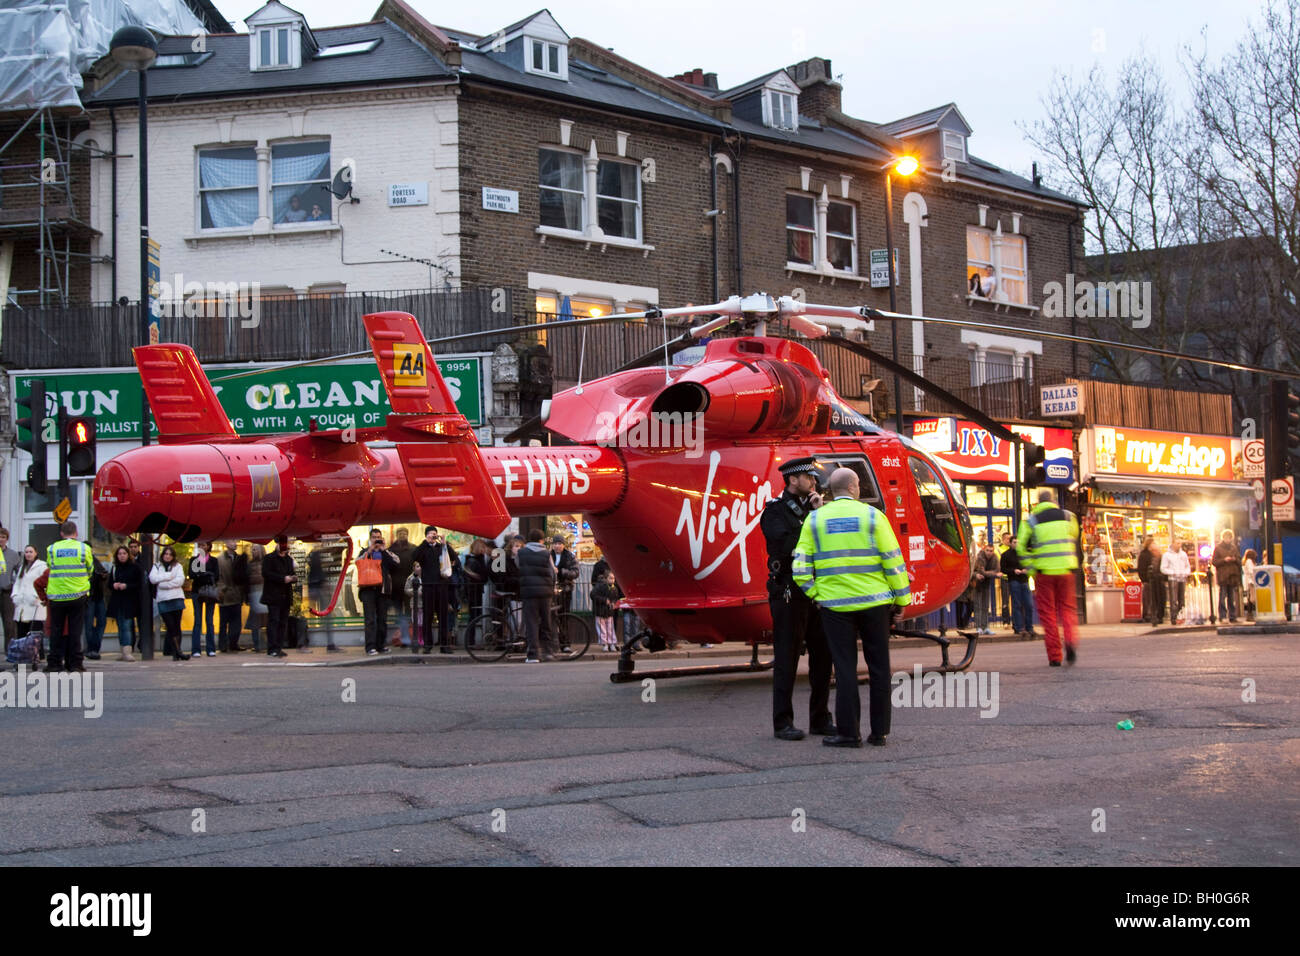 London Air Ambulance - Helicopter Emergency Medical Service (HEMS) - Tufnell Park - London Stock Photo